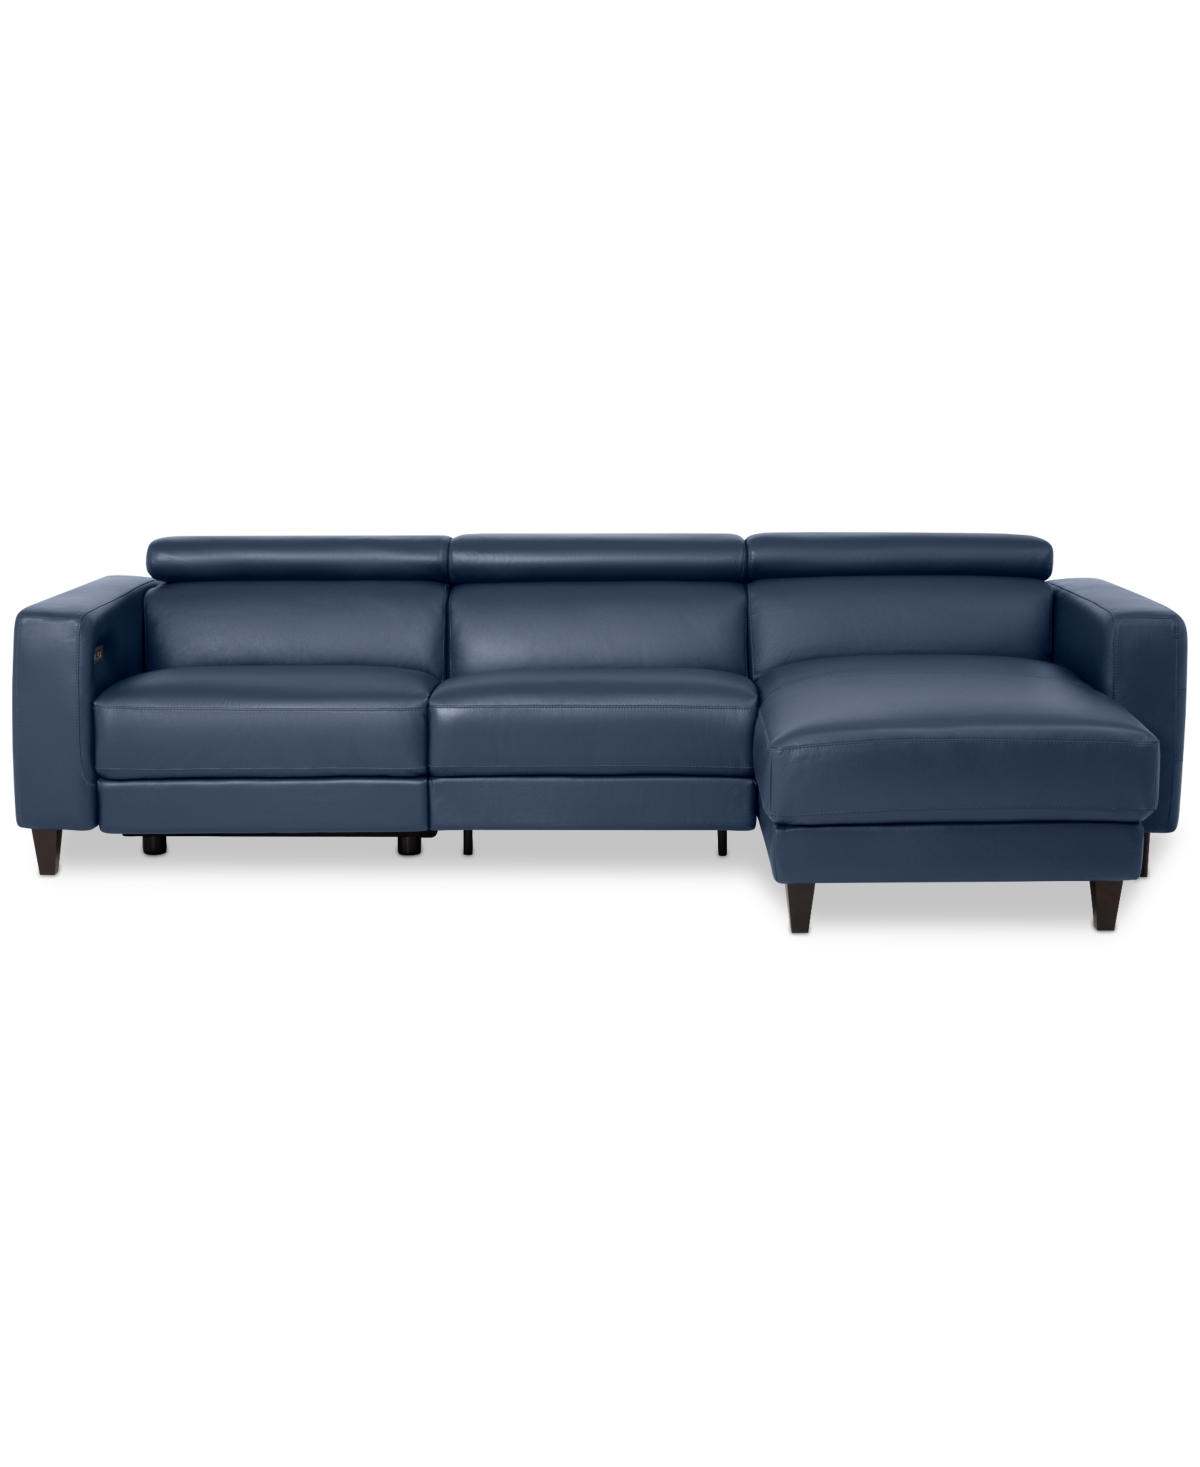 Furniture Silvanah 3-pc. Leather Sectional With Storage Chaise And 1 Power Recliner, Created For Macy's In Sapphire